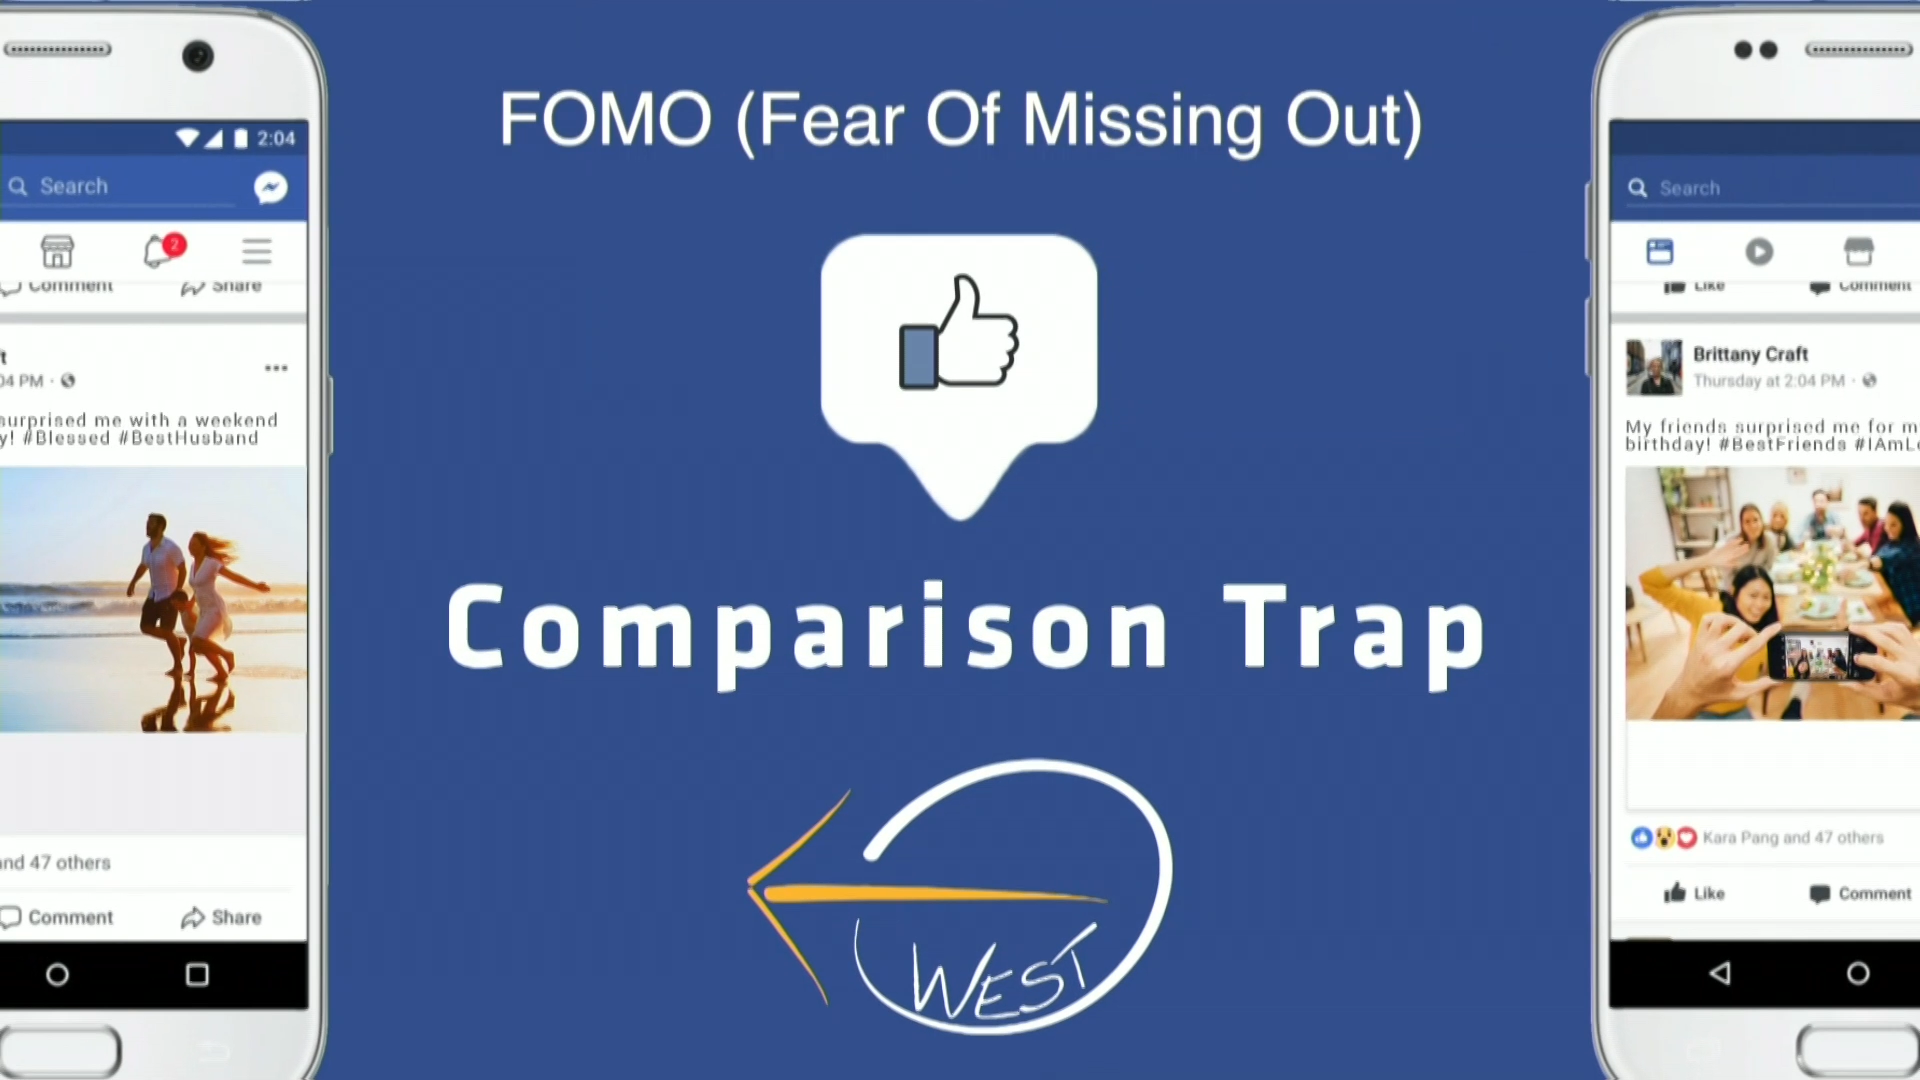 “FOMO (Fear of Missing Out)”